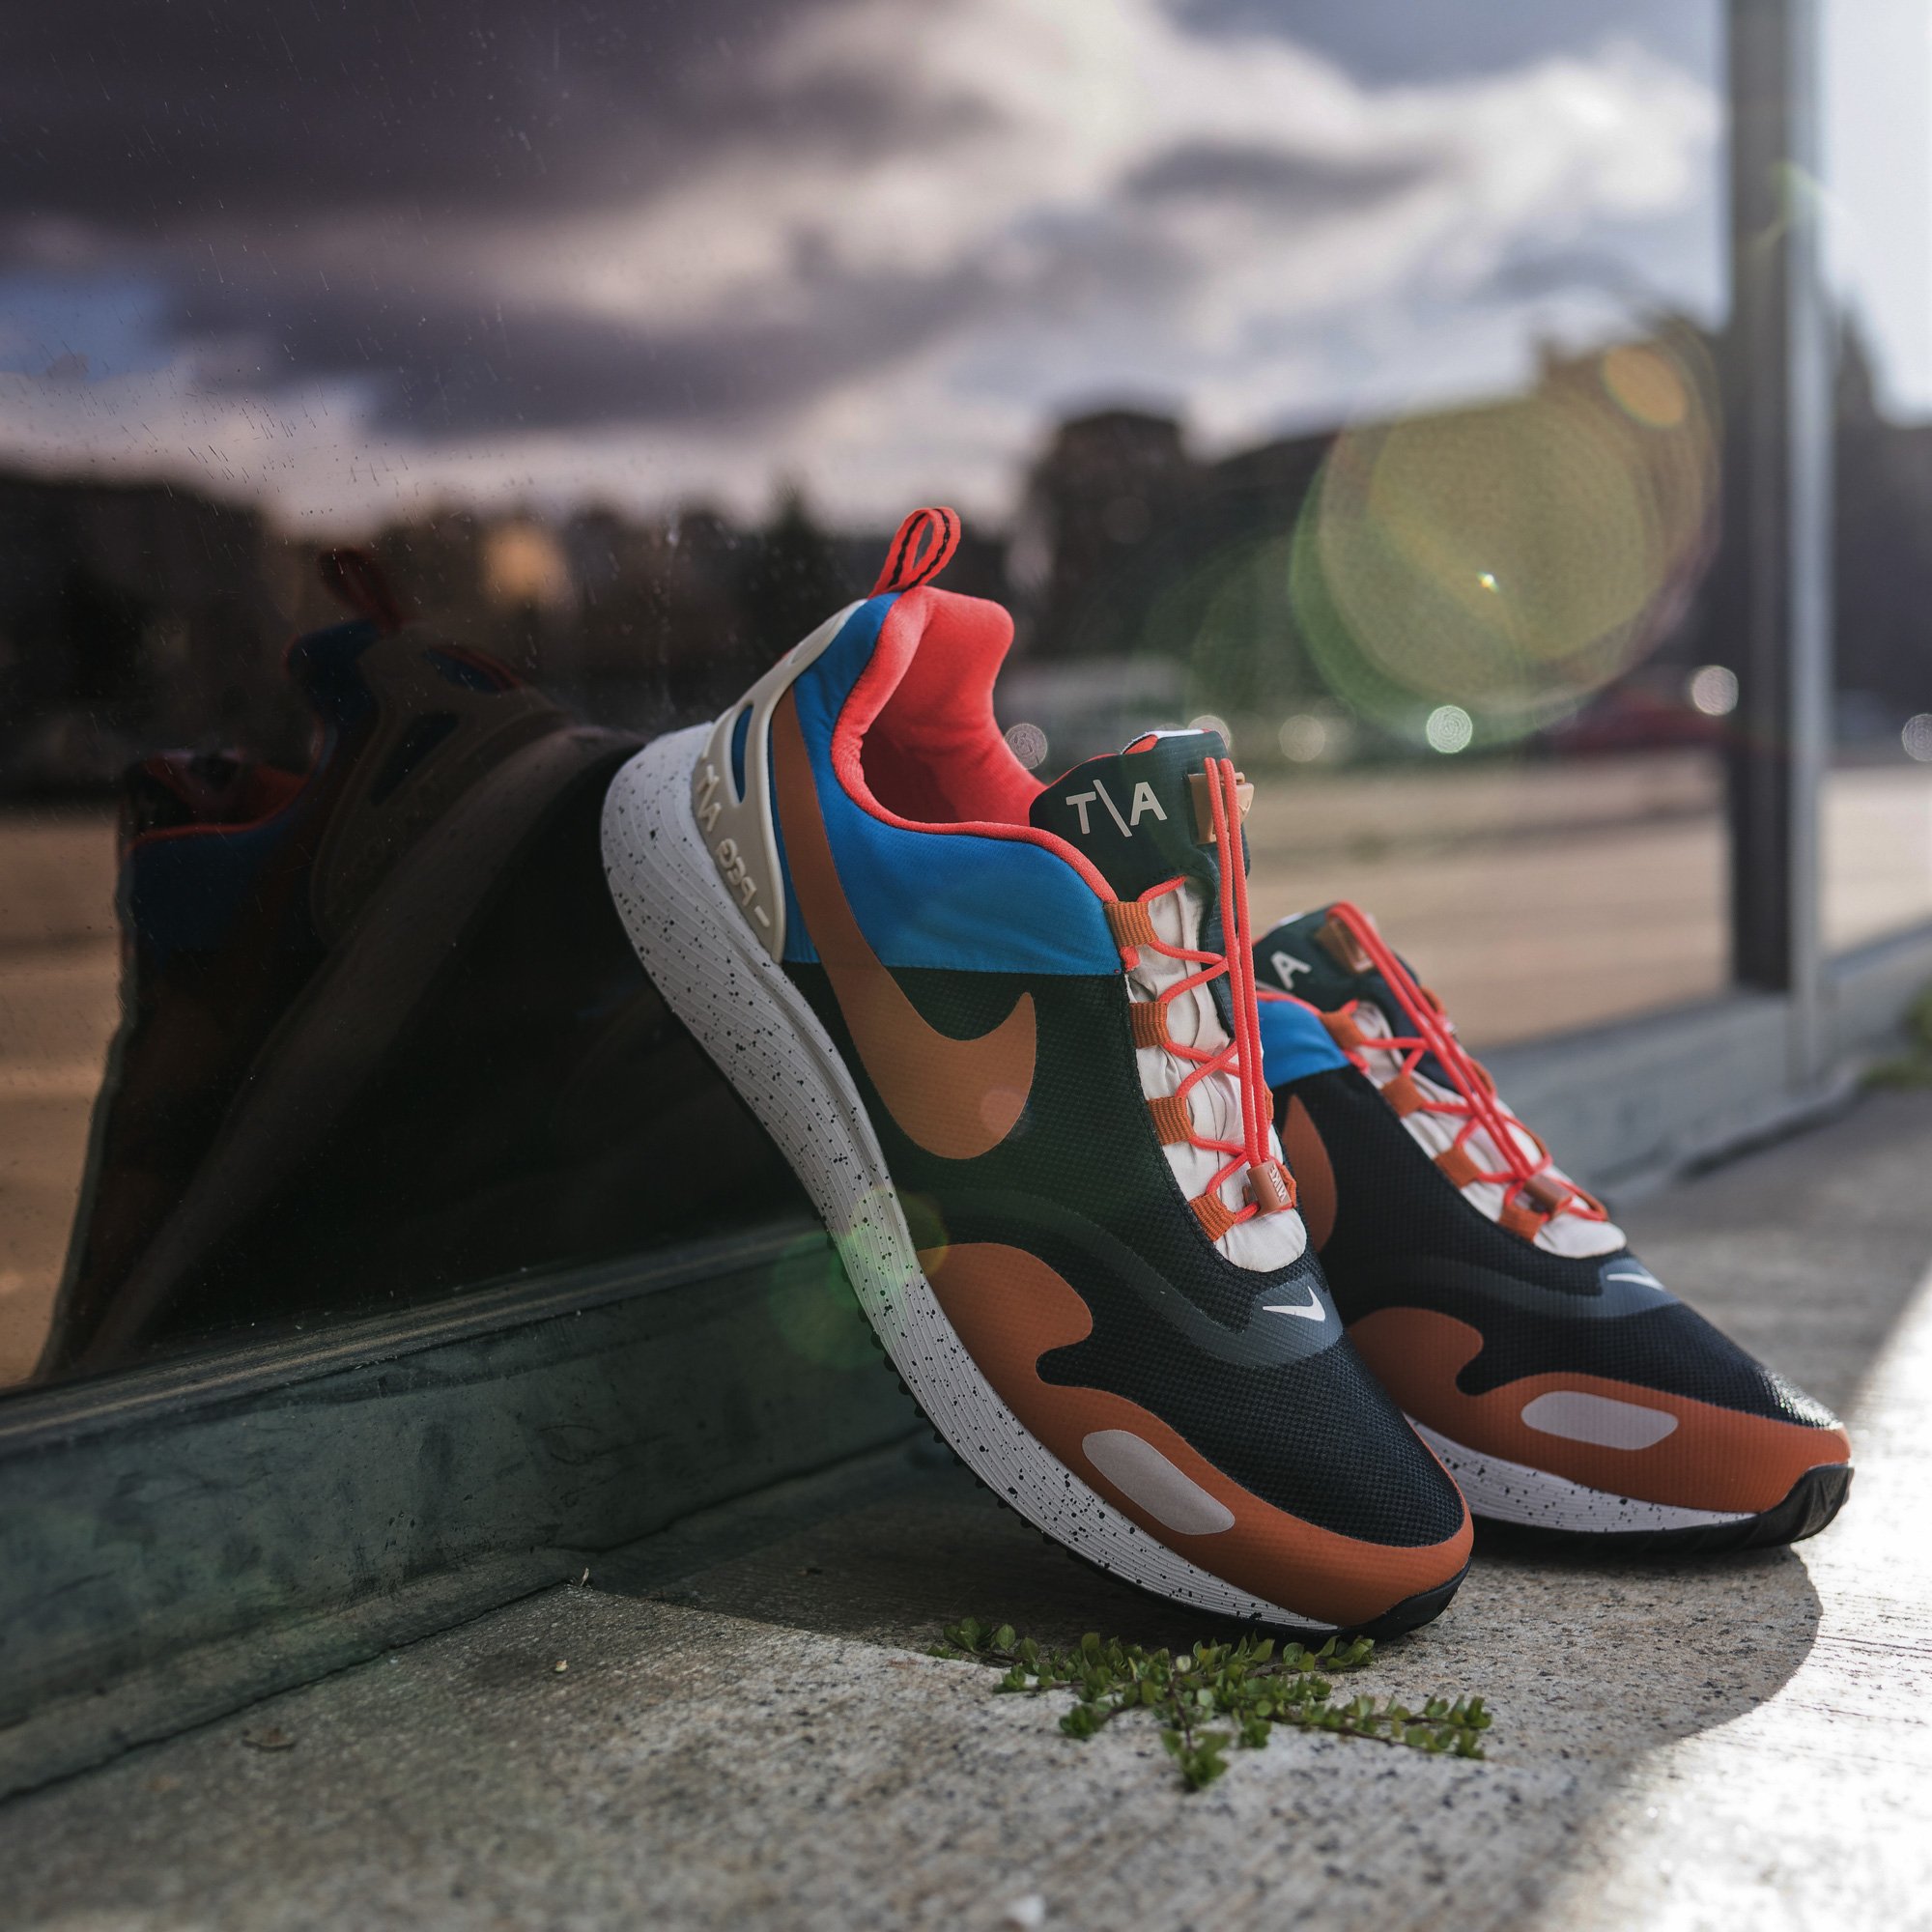 FOOTDISTRICT on Twitter: "In the rain, snow, or freezing cold, you'll have everything you need combat the harsh winter conditions in the Nike Air Pegasus A/T Winter QS. Black/Blue Nebula &amp;